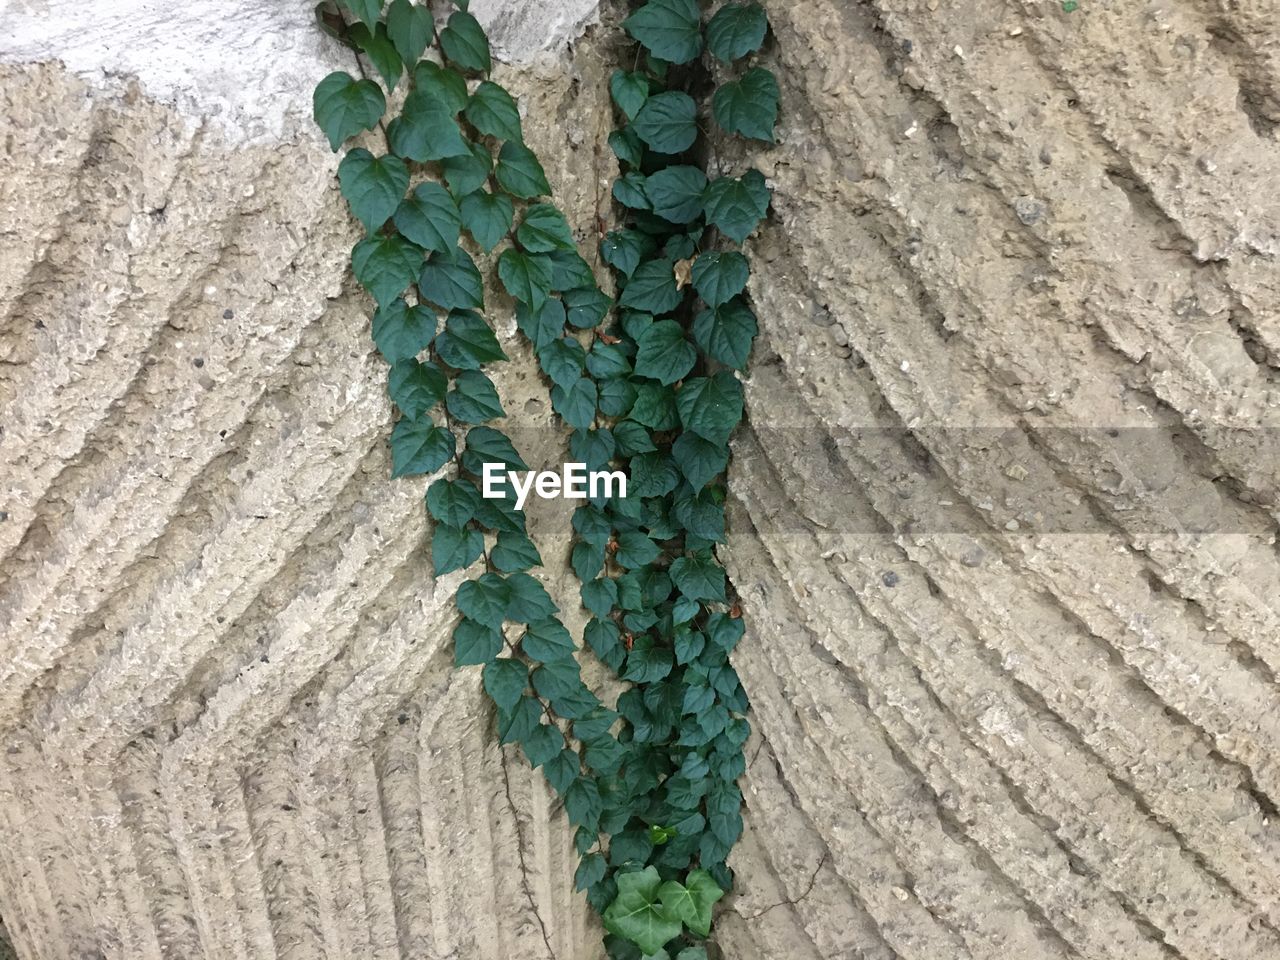 CLOSE-UP OF IVY GROWING ON TREE TRUNK